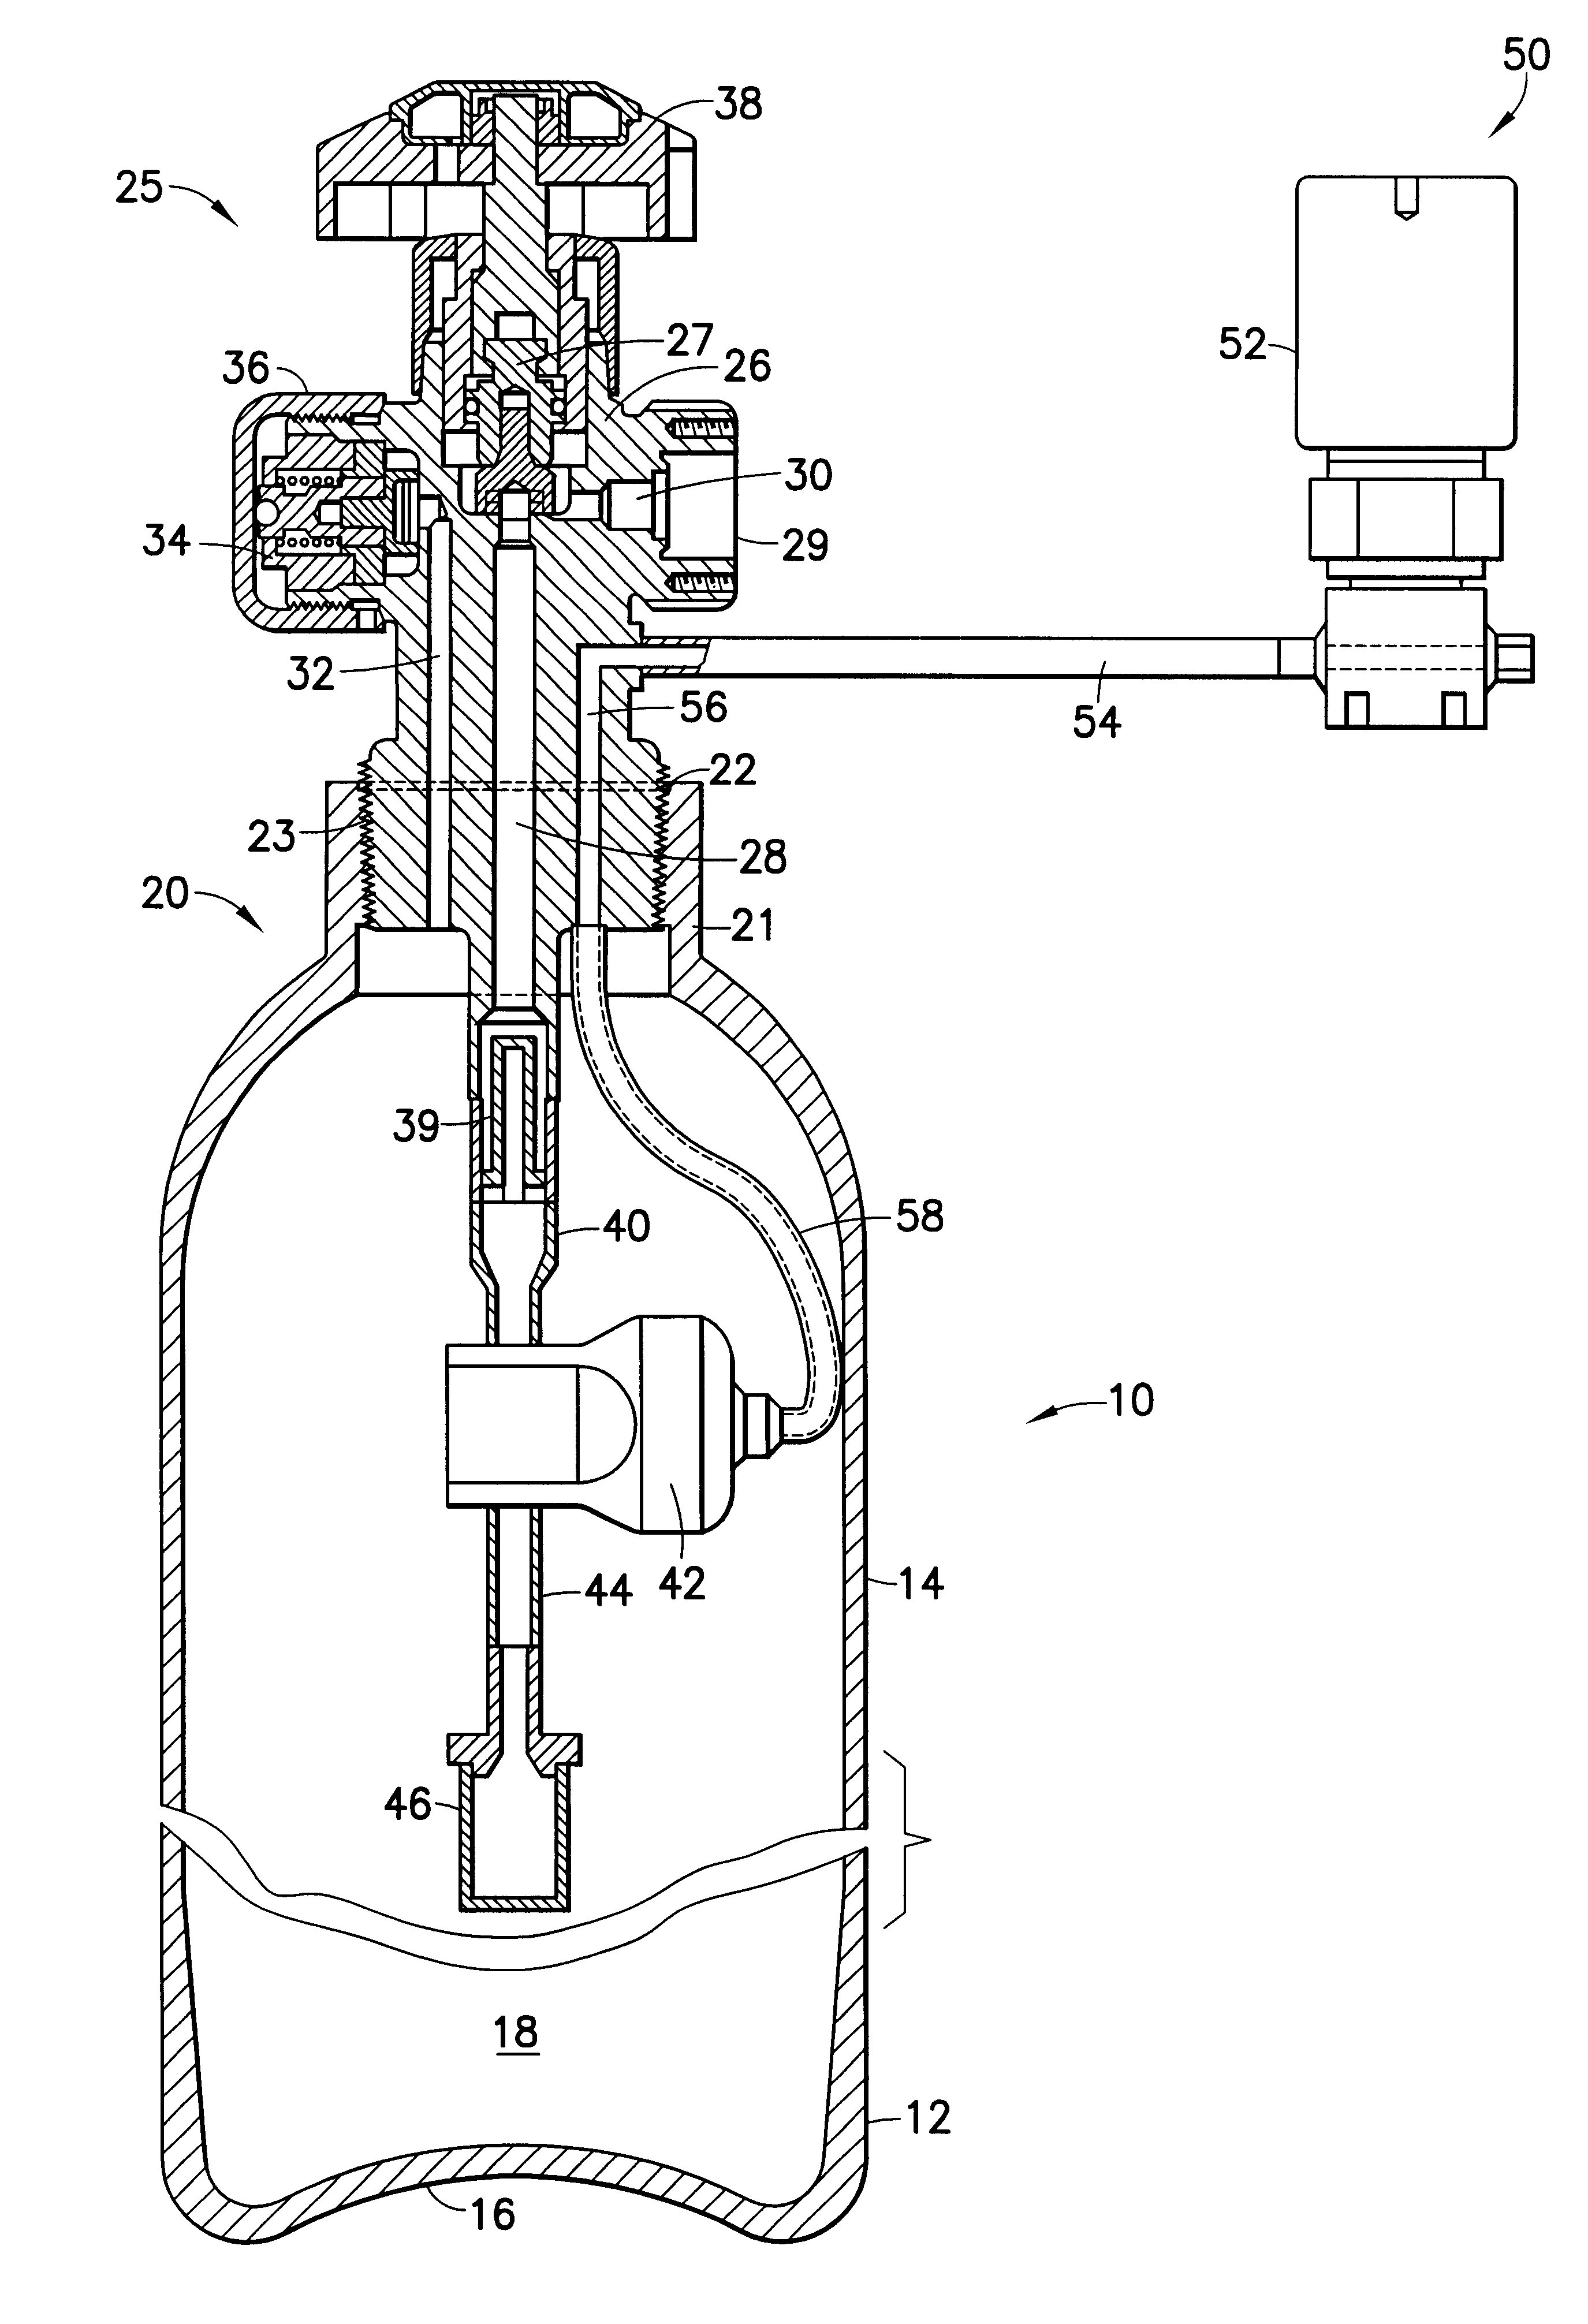 Fluid storage and dispensing system featuring interiorly disposed and exteriorly adjustable regulator for high flow dispensing of gas